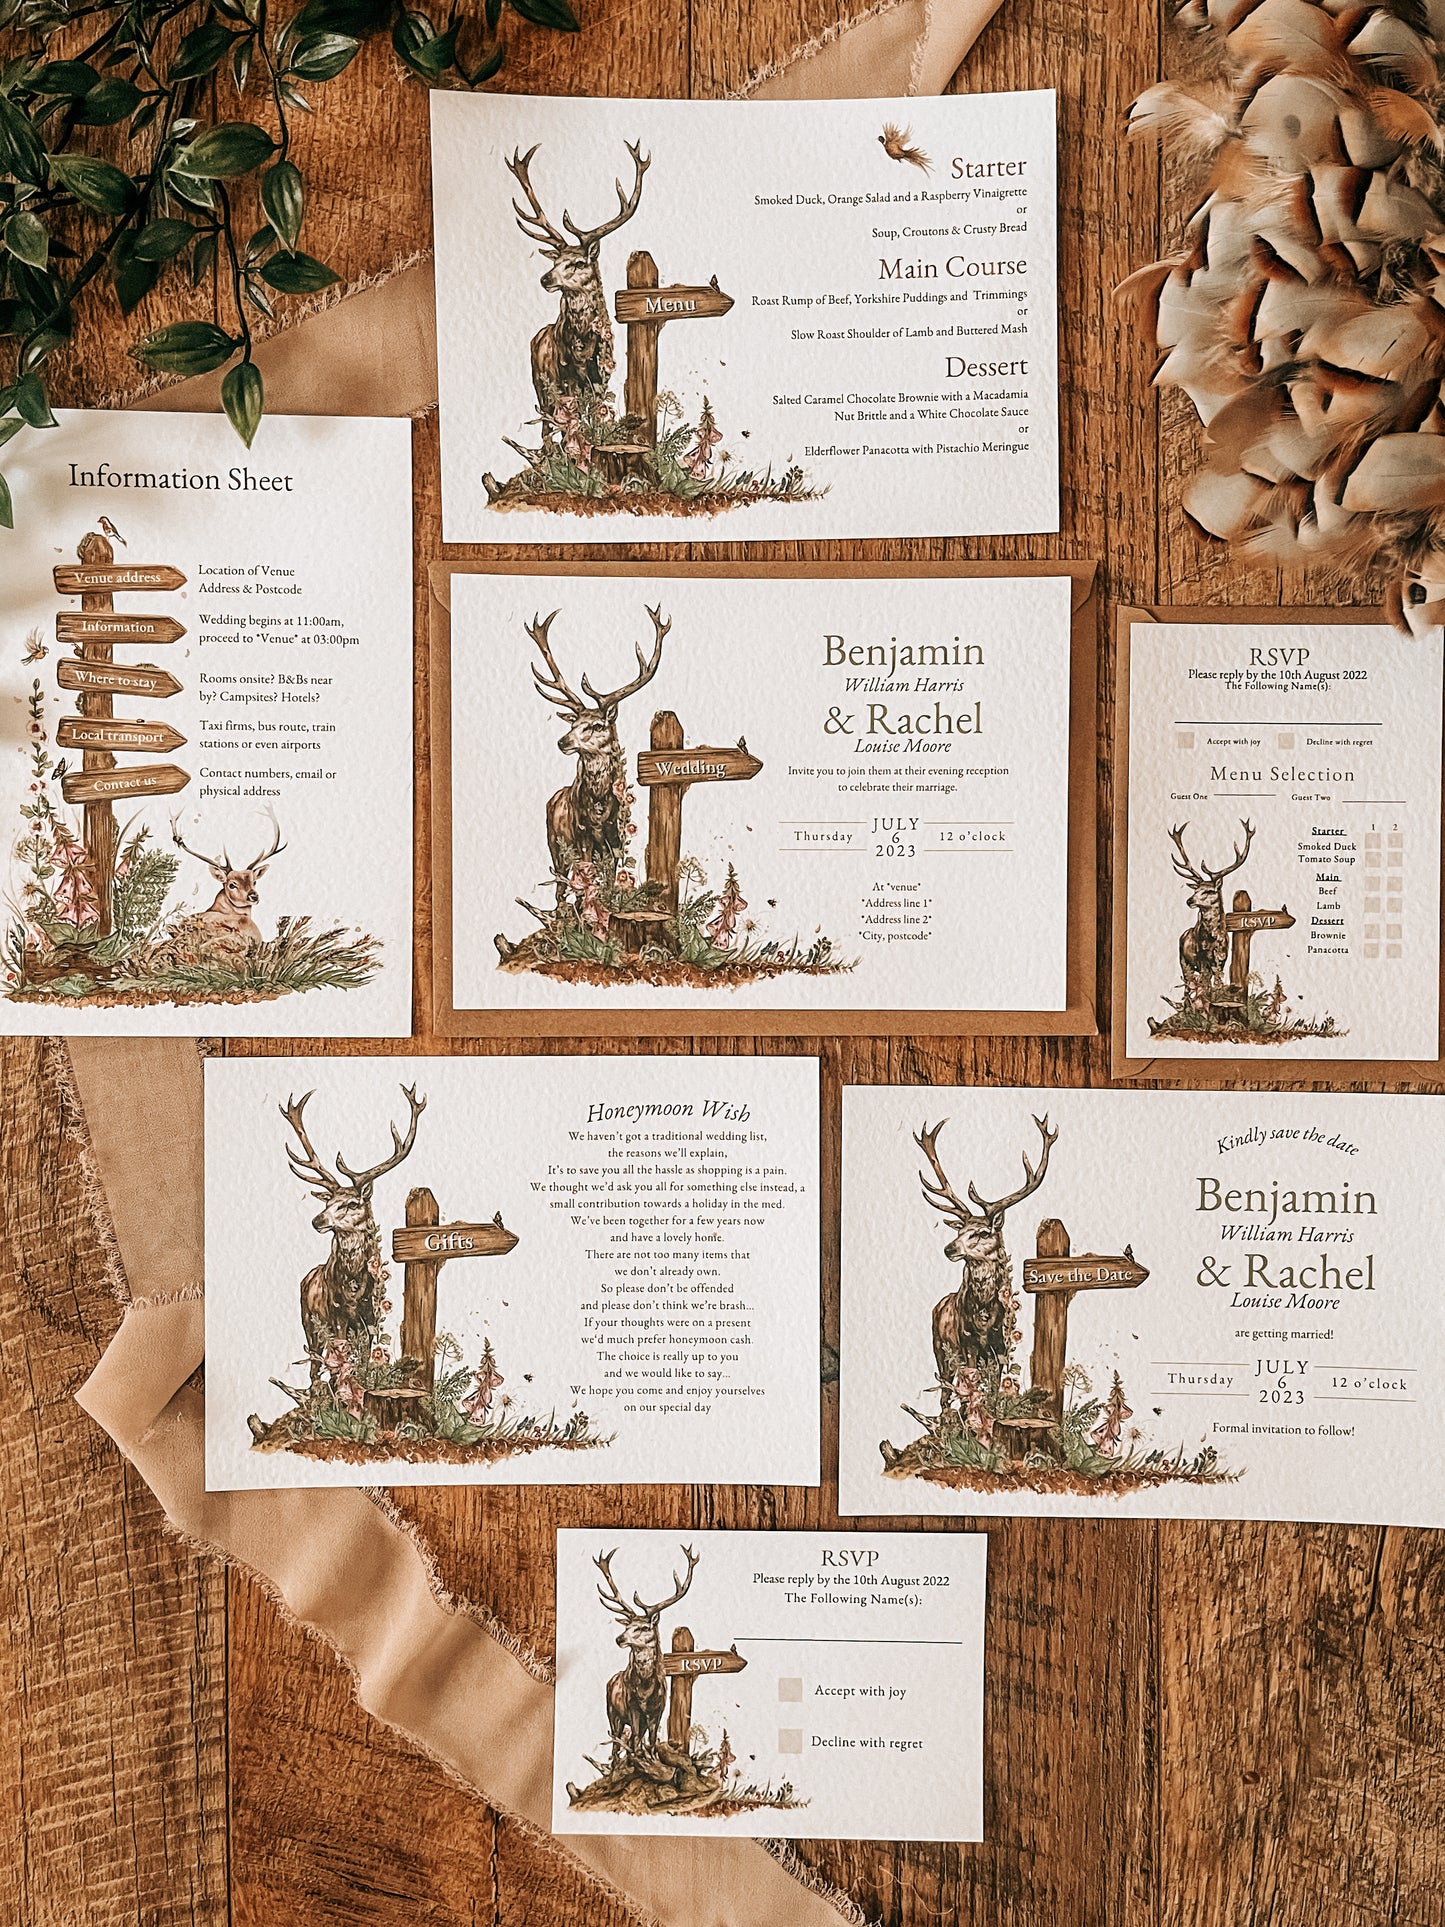 Stag and Signpost - Full Range